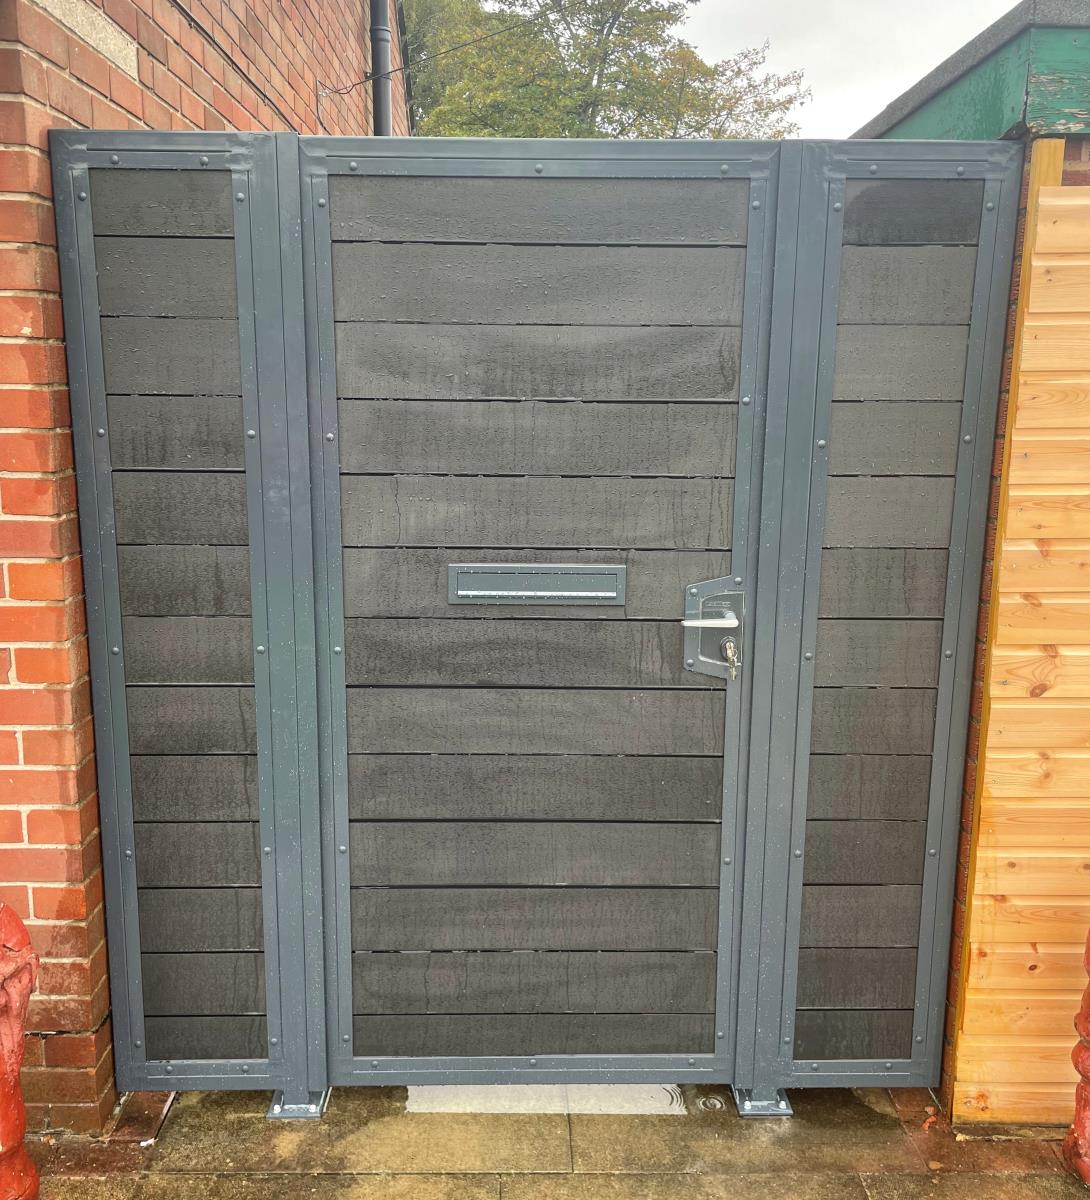 Charcoal black composite infill inside anthracite grey frame gates for a property in Leyland.